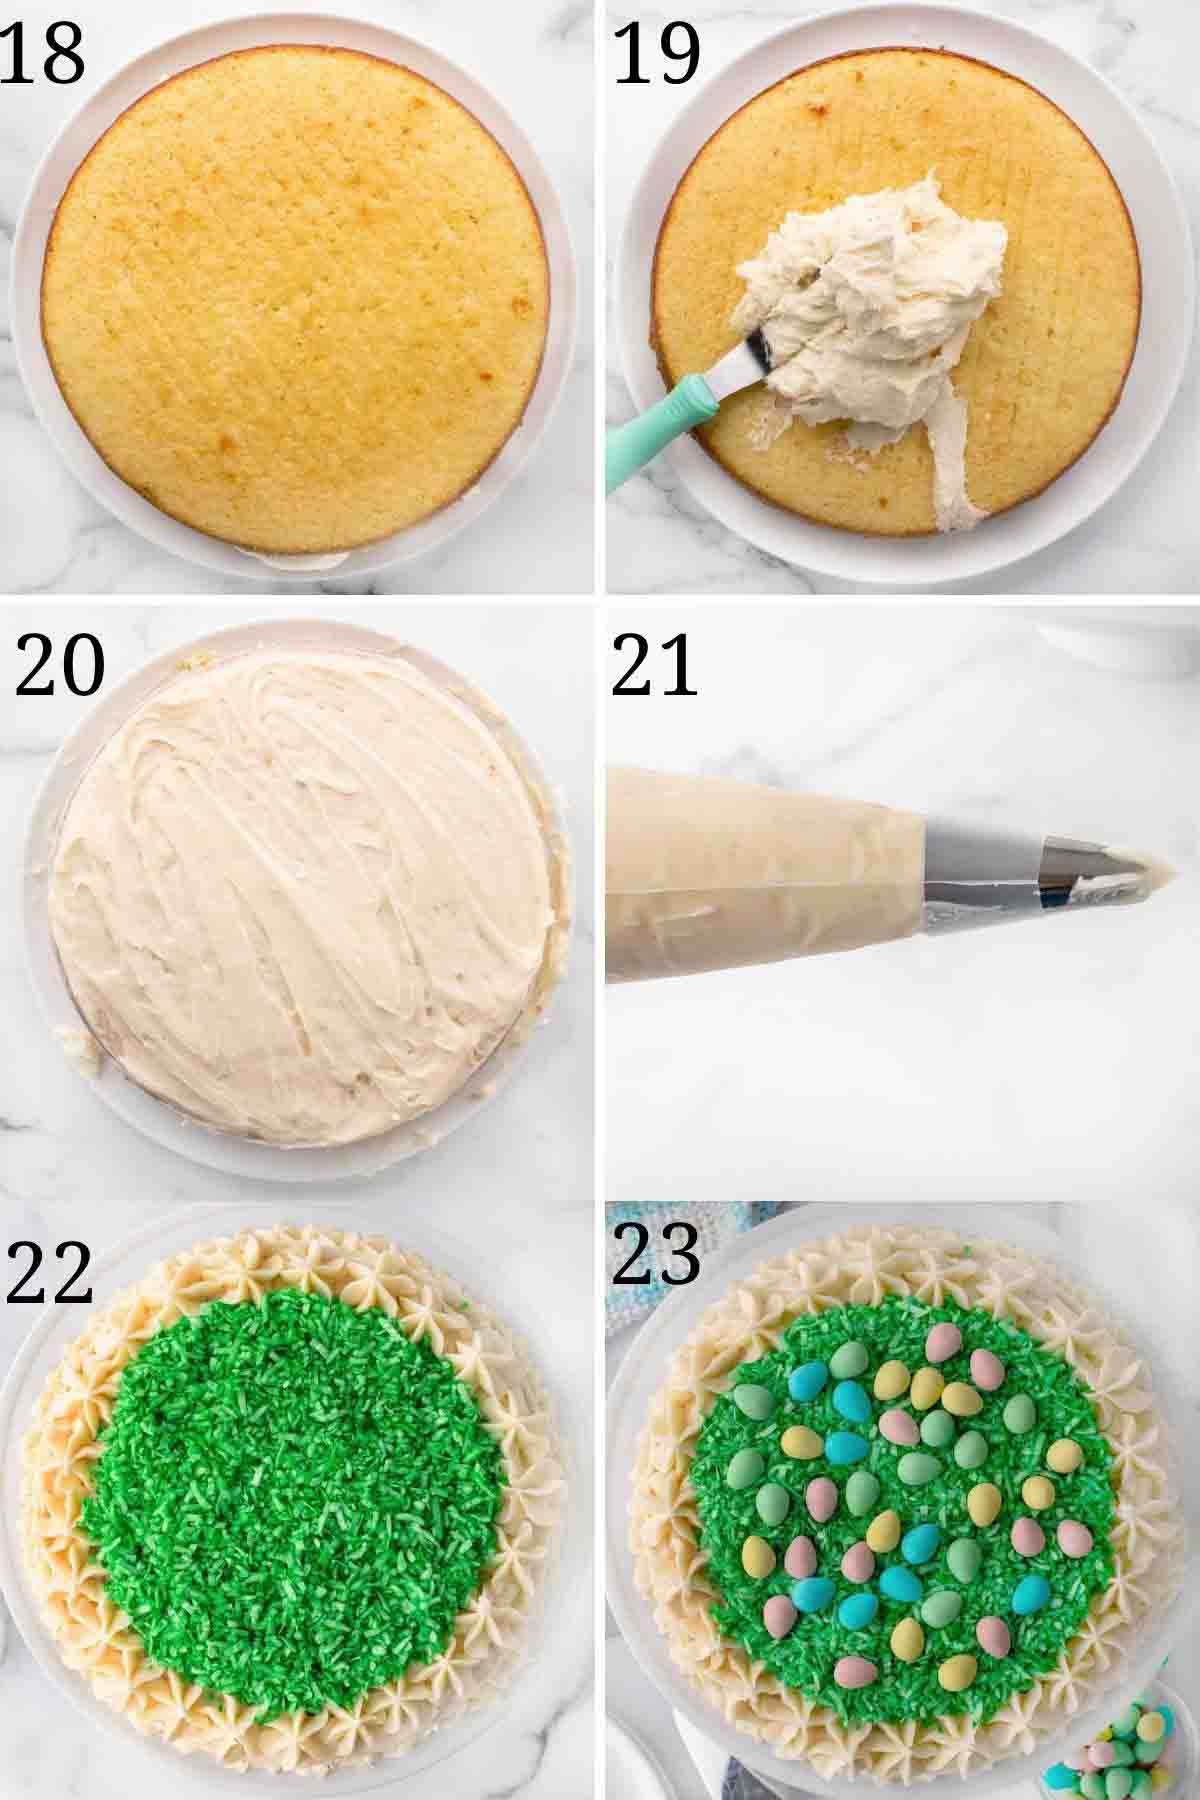 6 images showing how to assemble and decorate a coconut cake